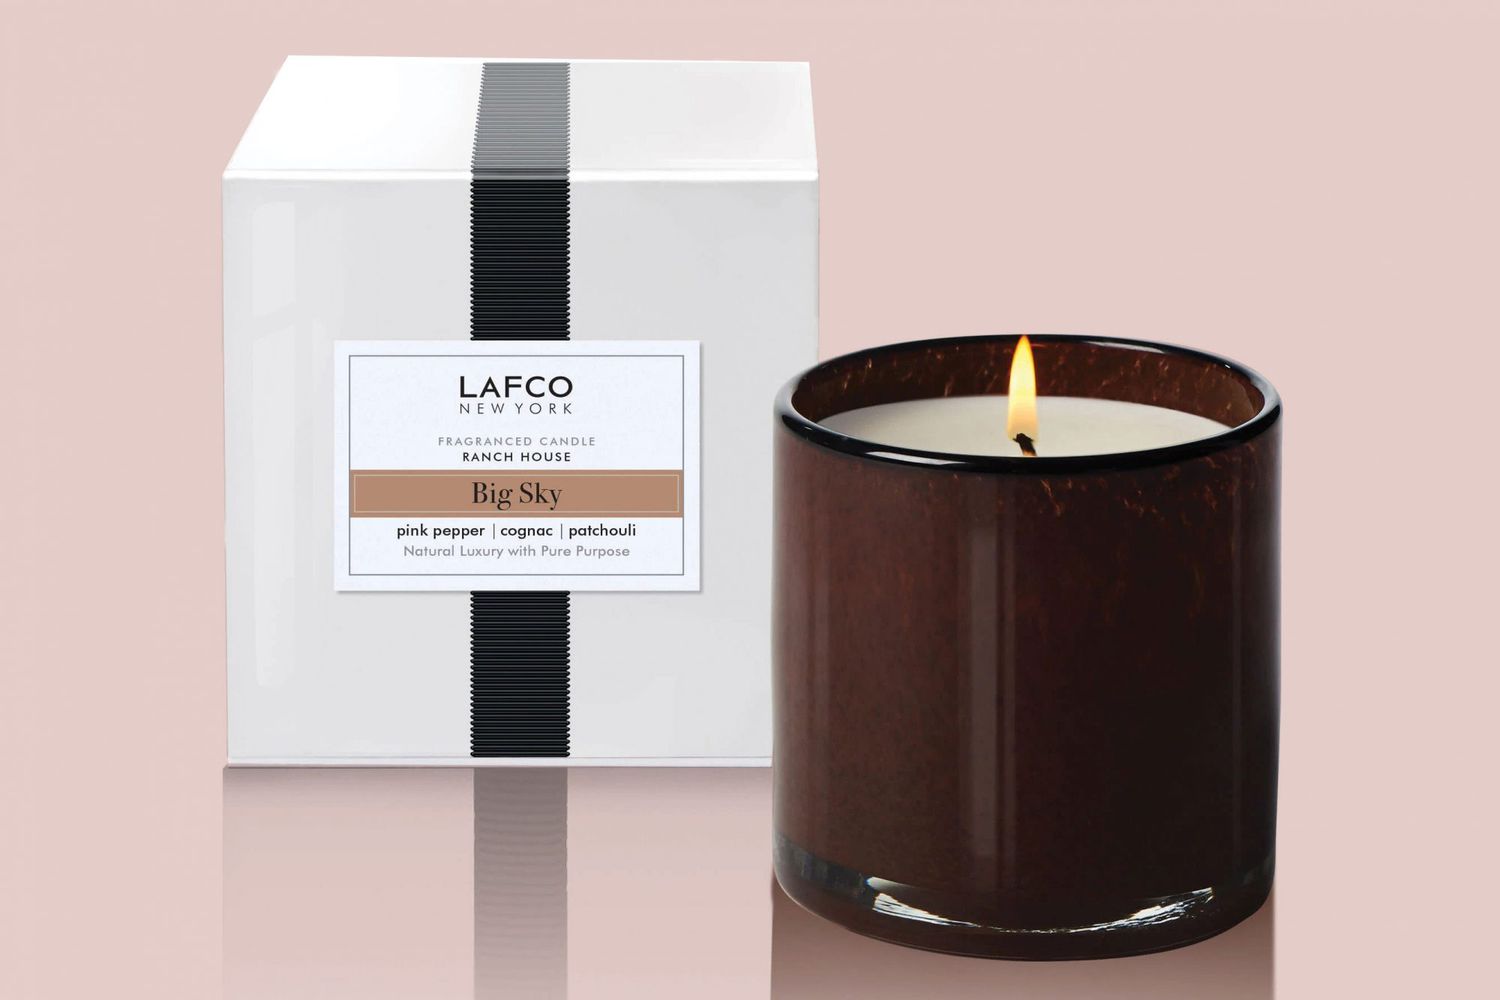 LAFCO Big Sky Ranch House Signature Candle